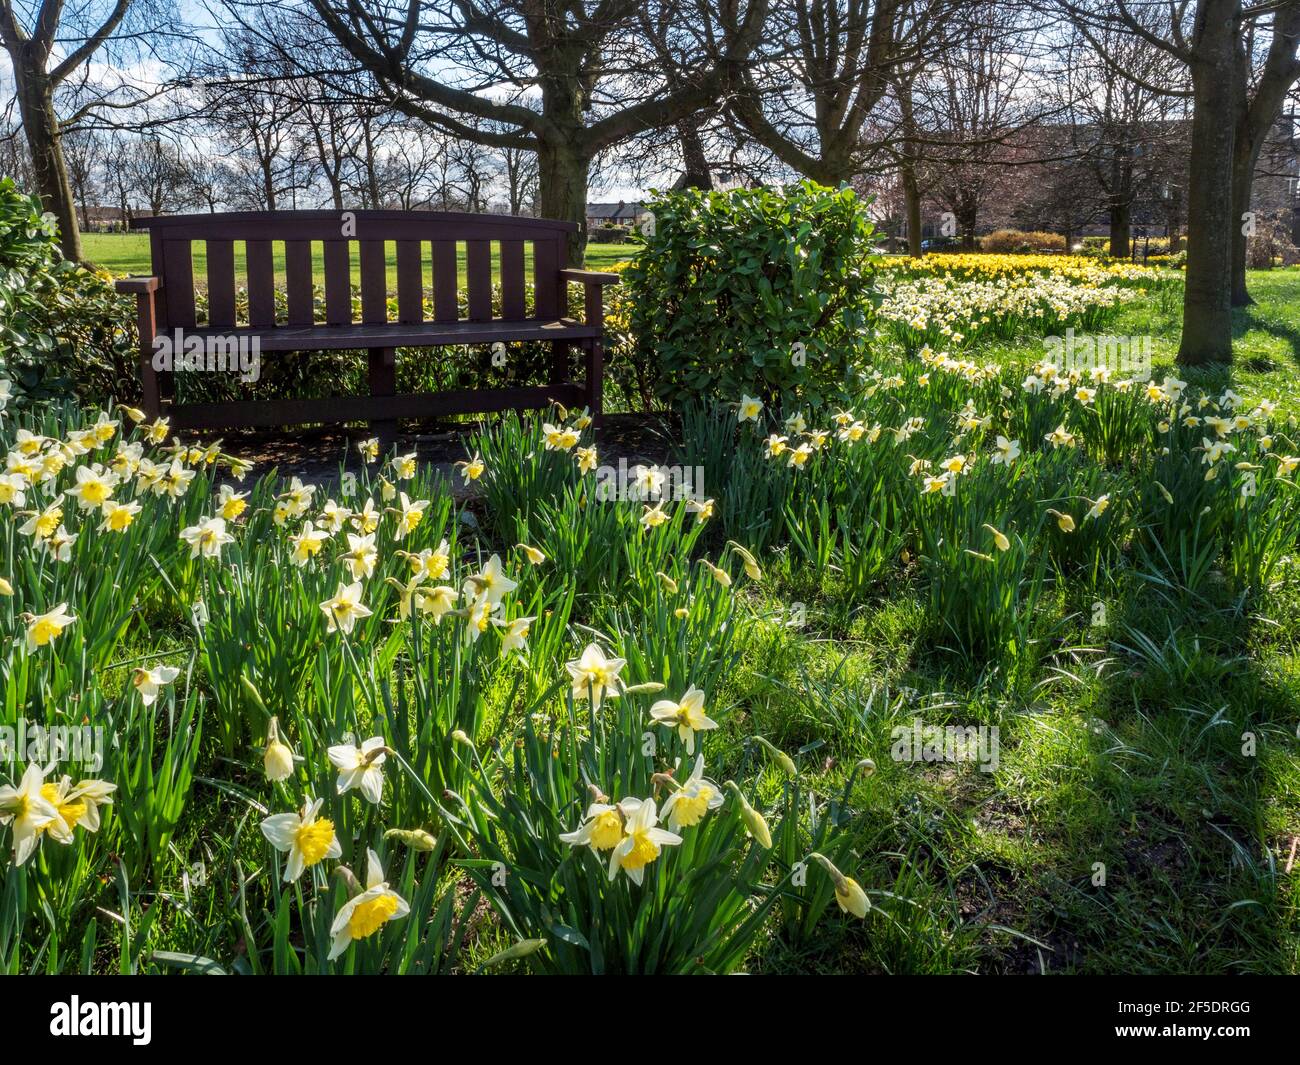 Narcisi in fiore a Belmont Park in Starbeck Harrogate North Yorkshire Inghilterra Foto Stock